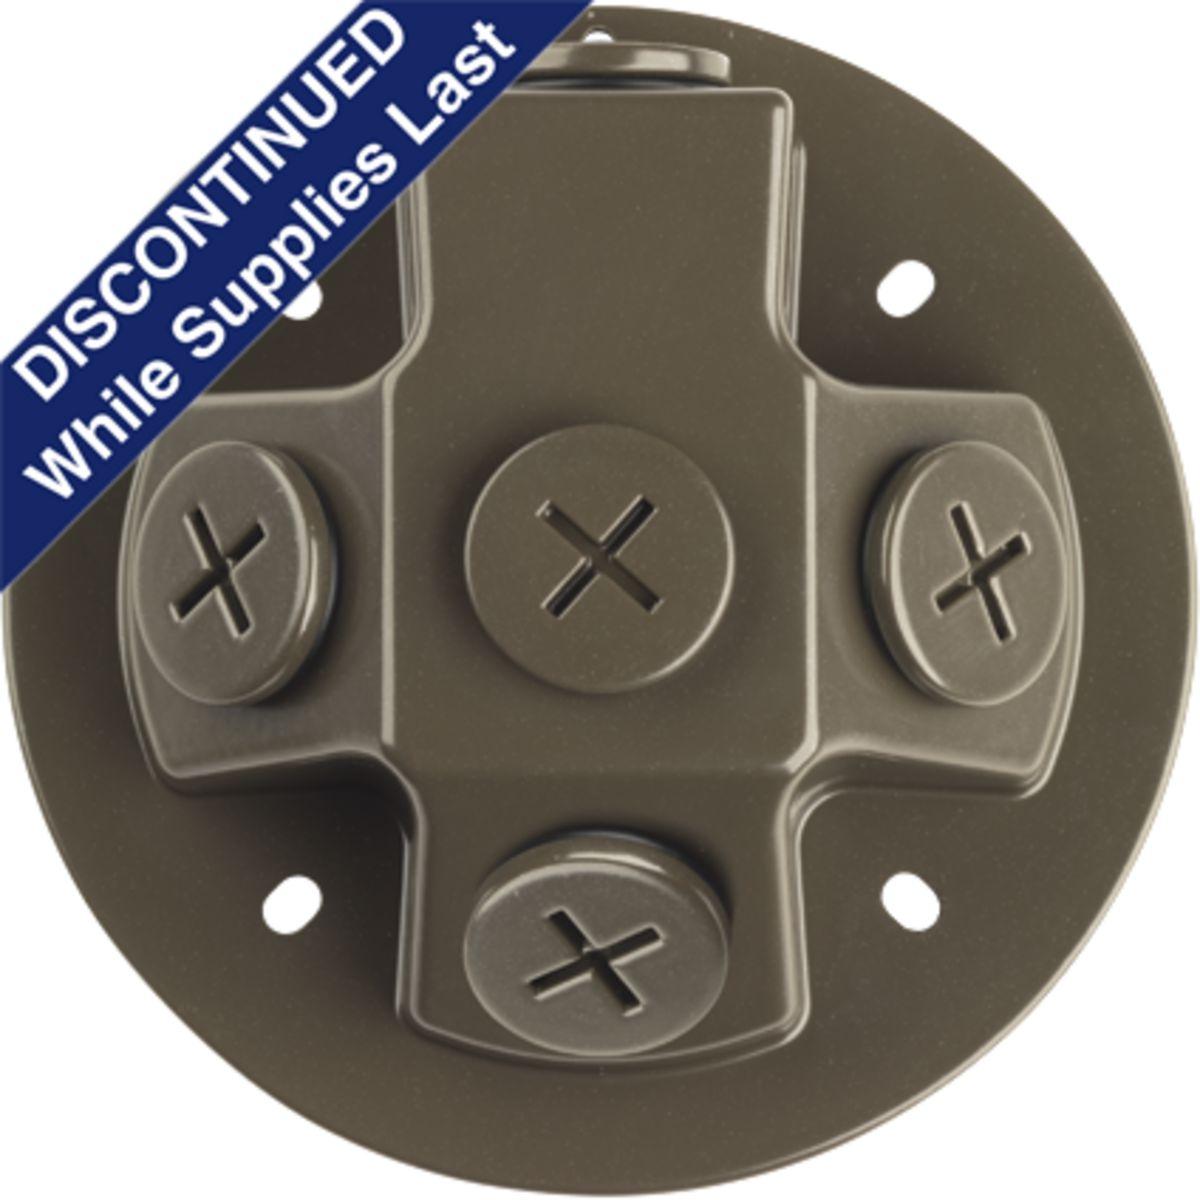 Hubbell P6343-20 Backplate for the LED flood lights with die-cast construction. This back plate can be used with a single head or multiple heads and motion sensors. Heads are sold separately (P6342). Antique Bronze finish.  ; Backplate for the LED Security flood lights. ;